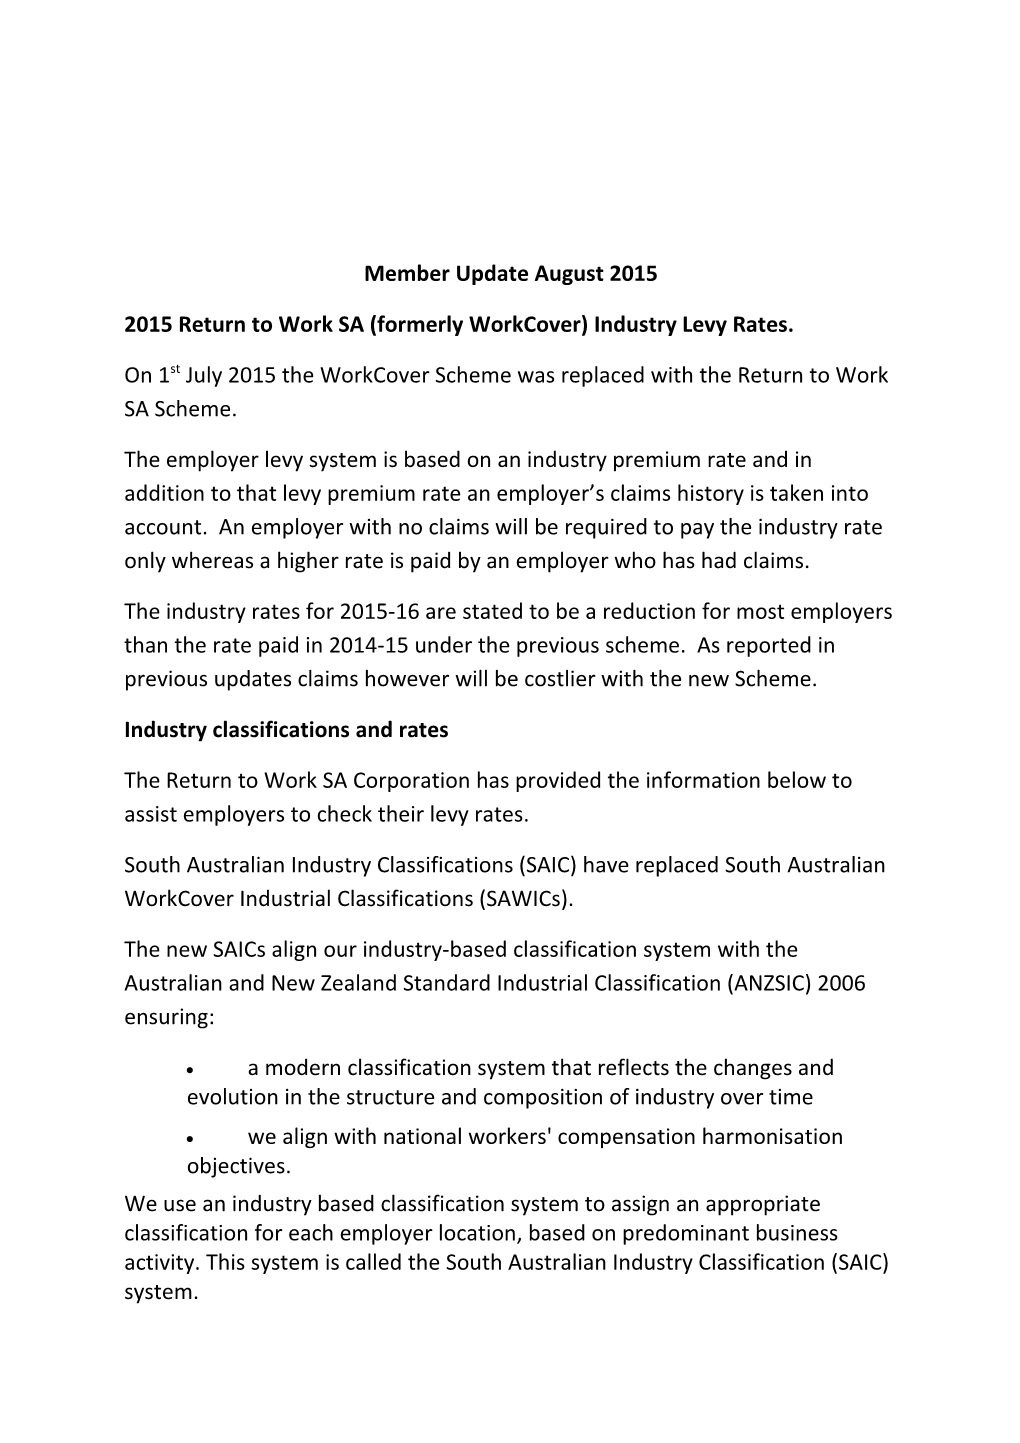 2015 Return to Work SA (Formerly Workcover) Industry Levy Rates